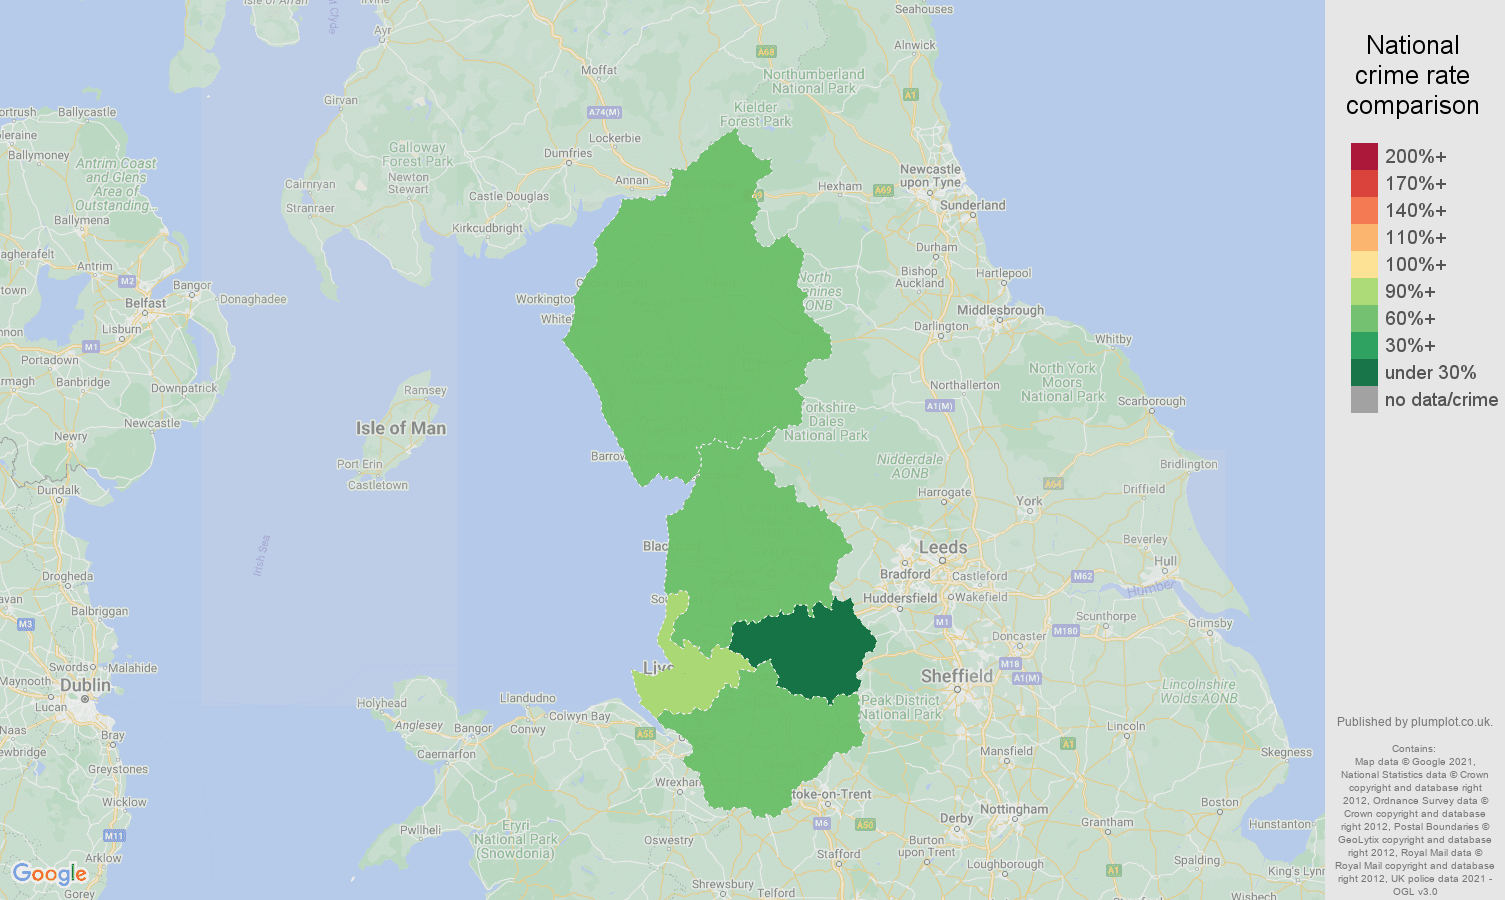 North West other theft crime rate comparison map